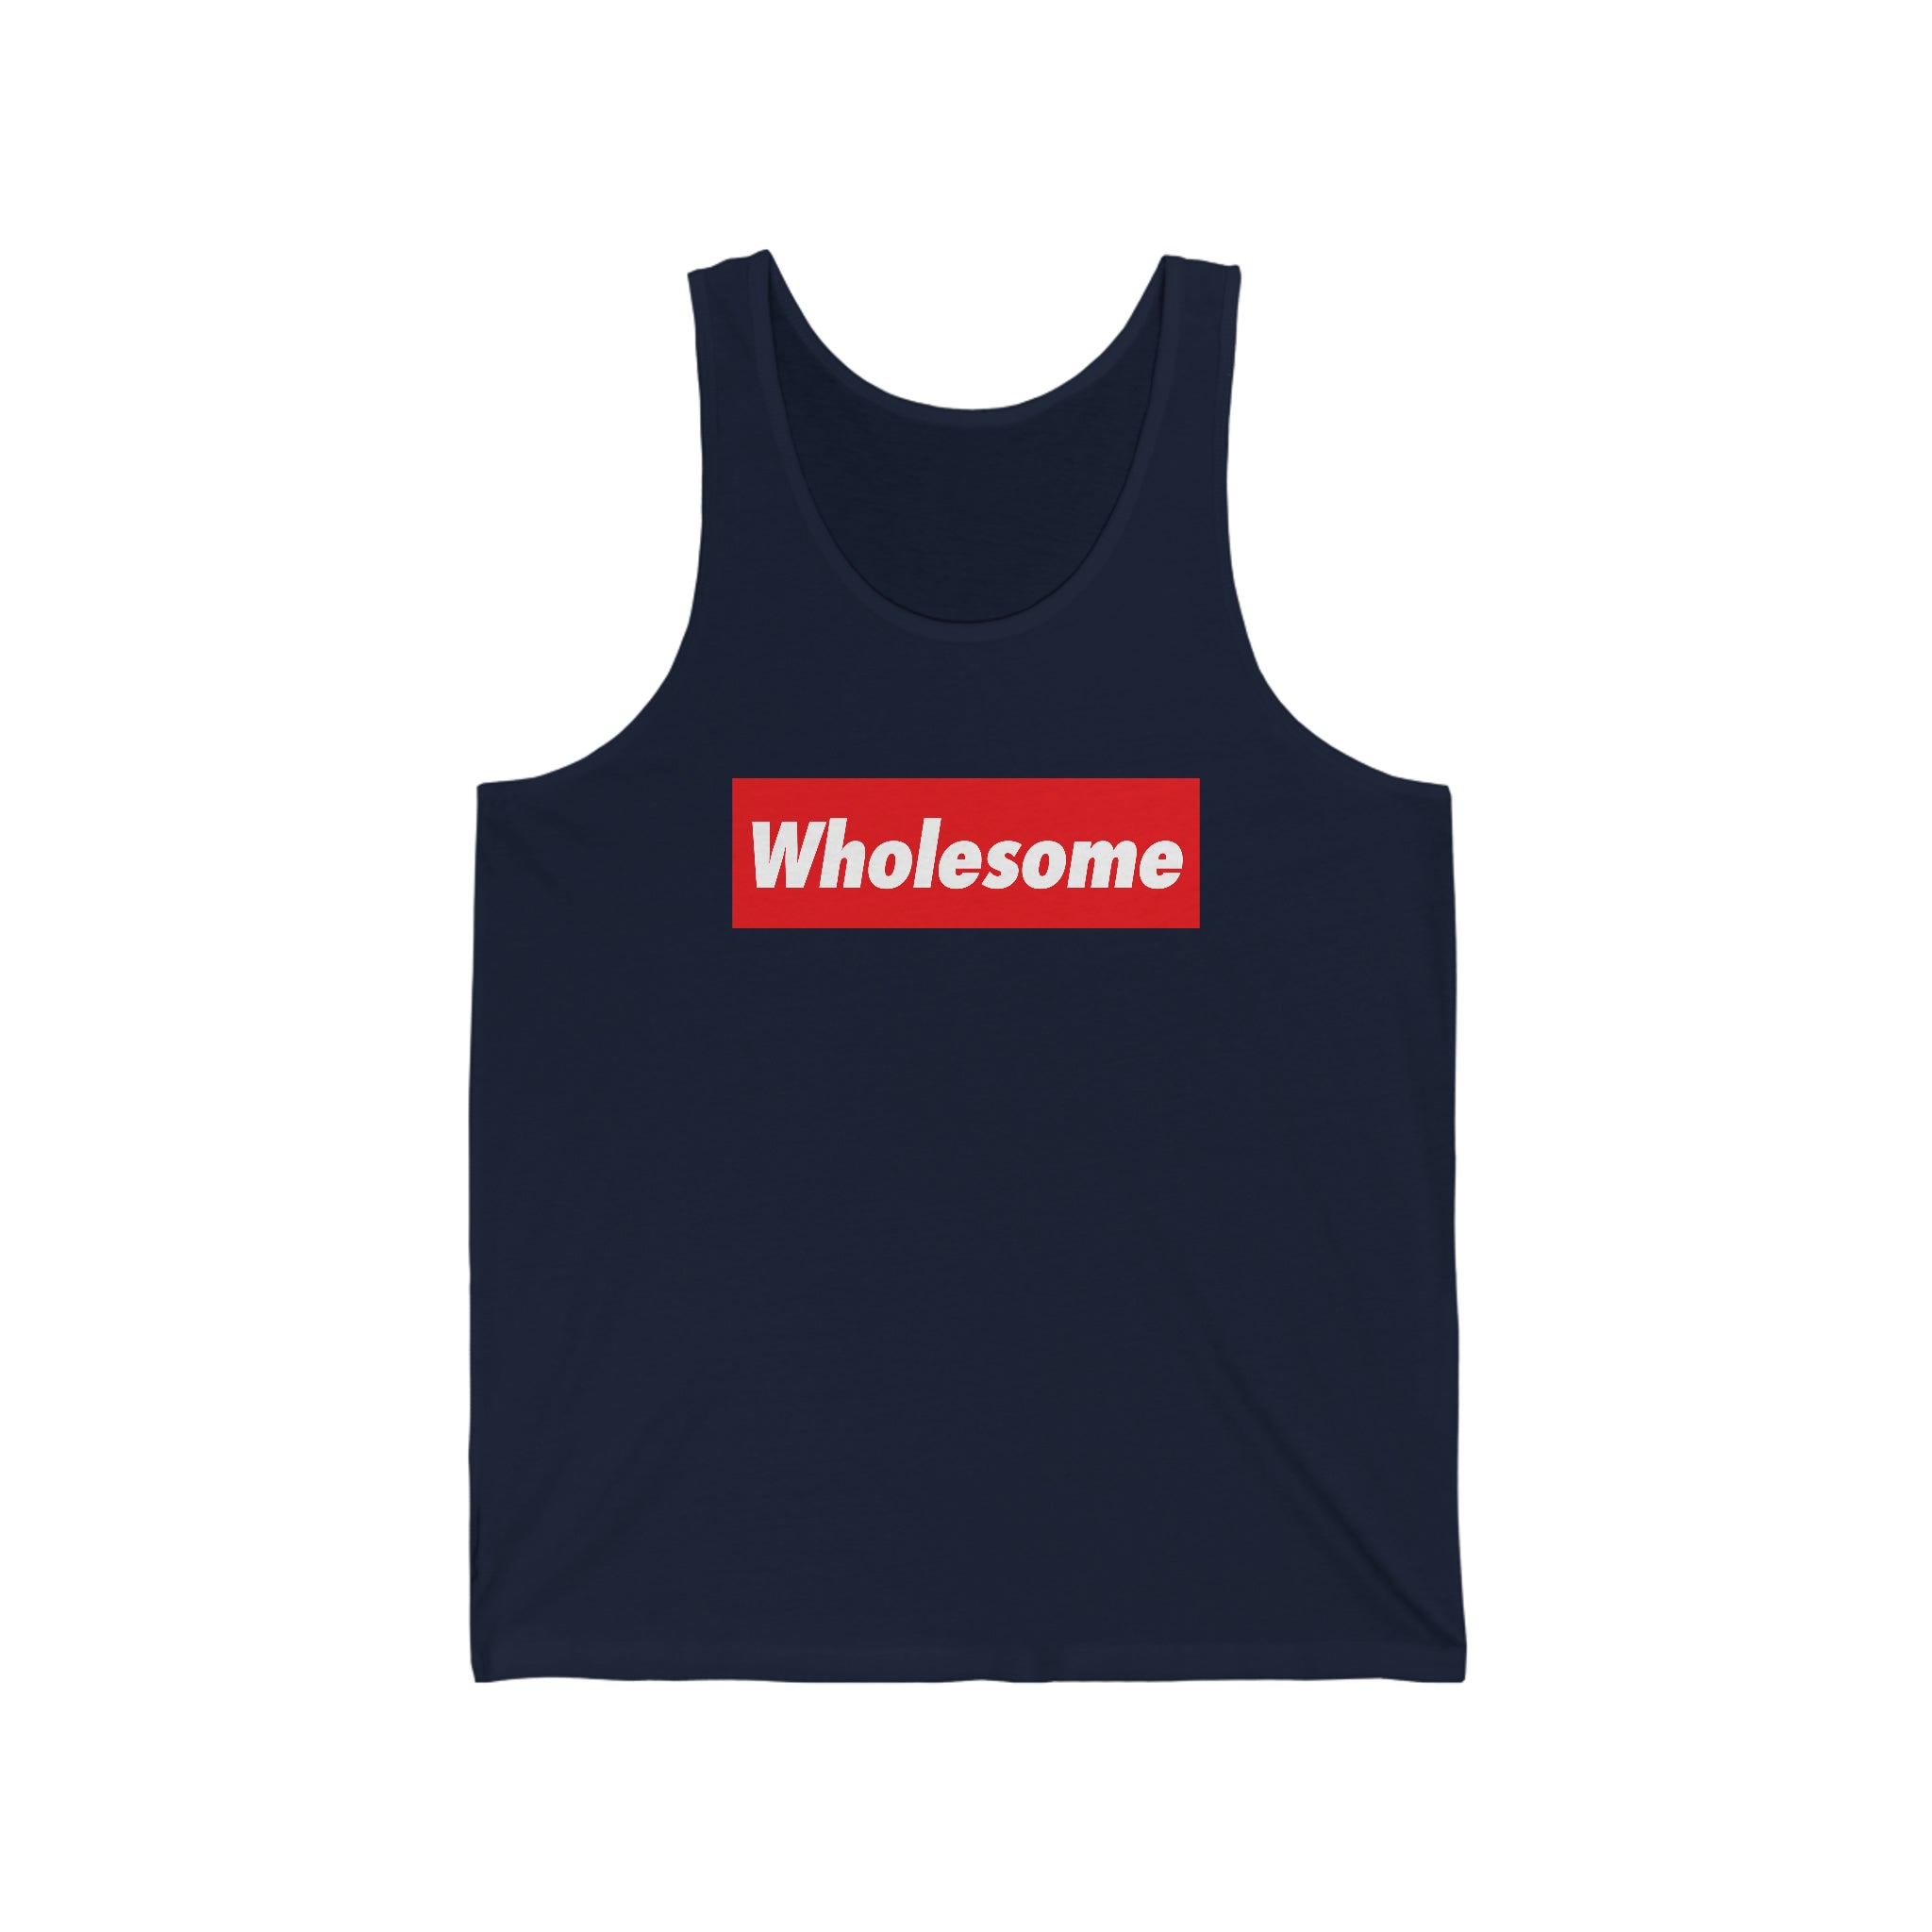 Wholesome Red Banner : Unisex 100% Cotton Tank